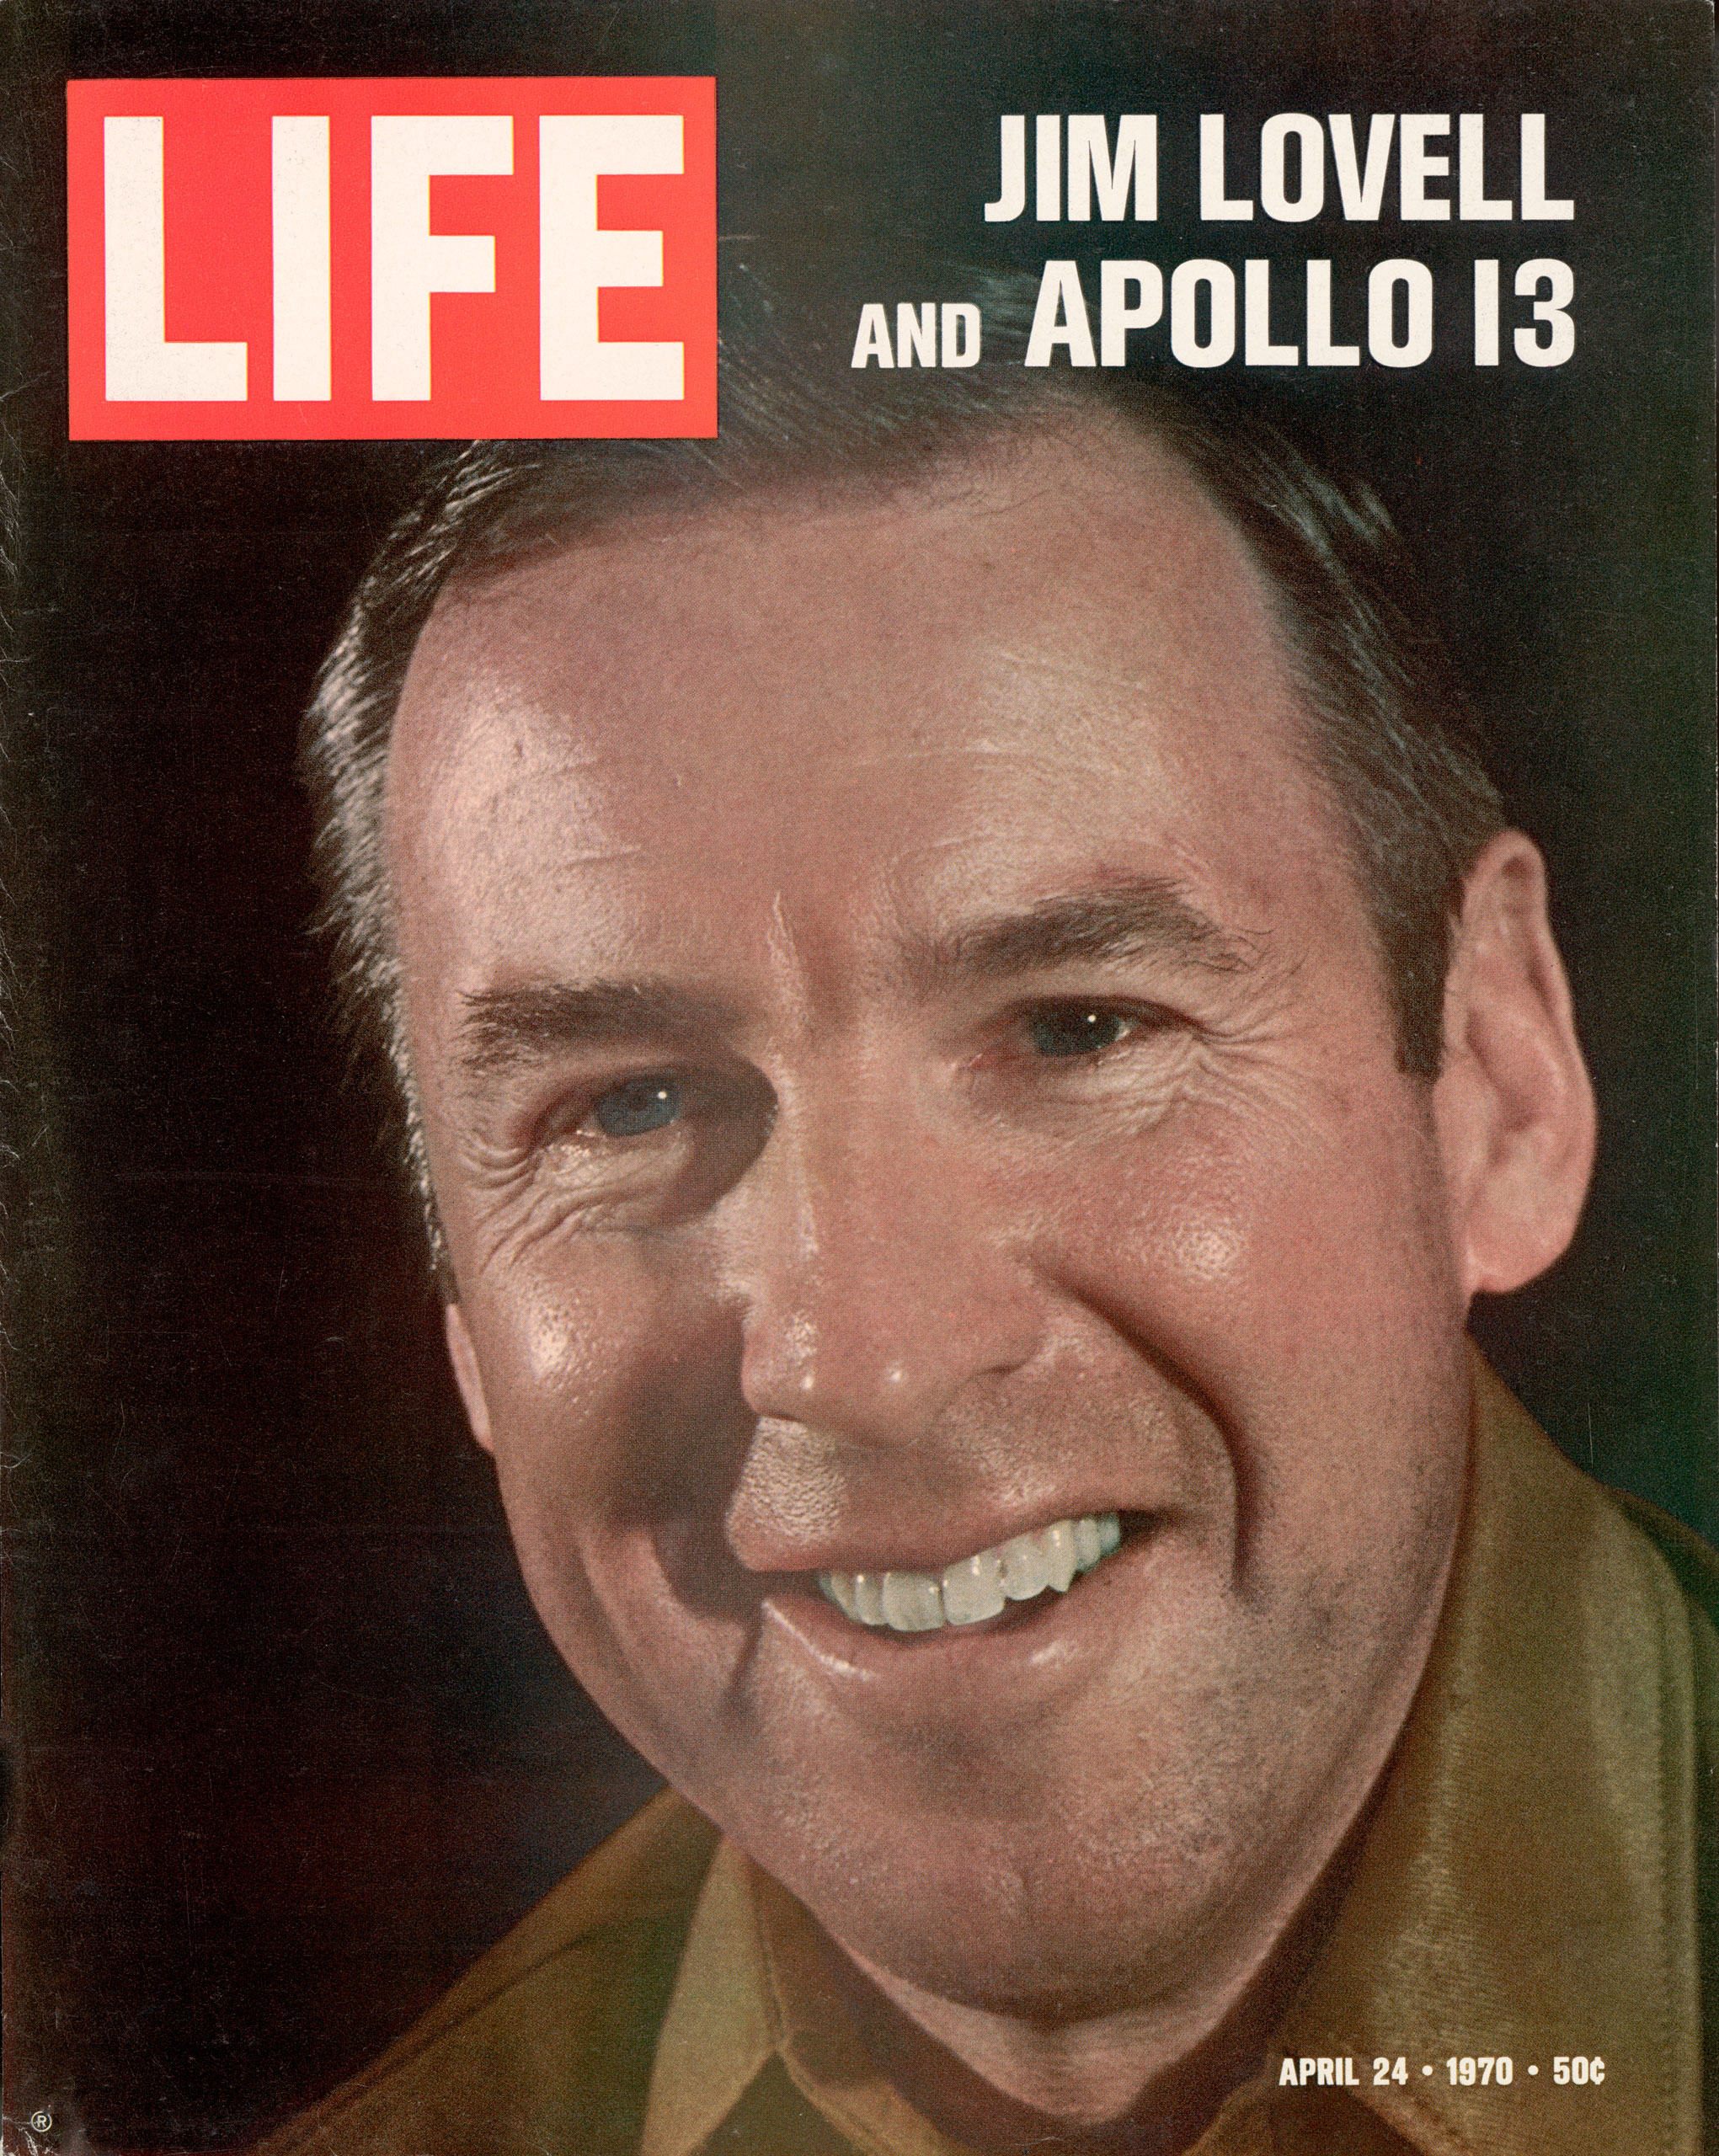 LIFE Magazine cover April 24, 1970 with Jim Lovell.